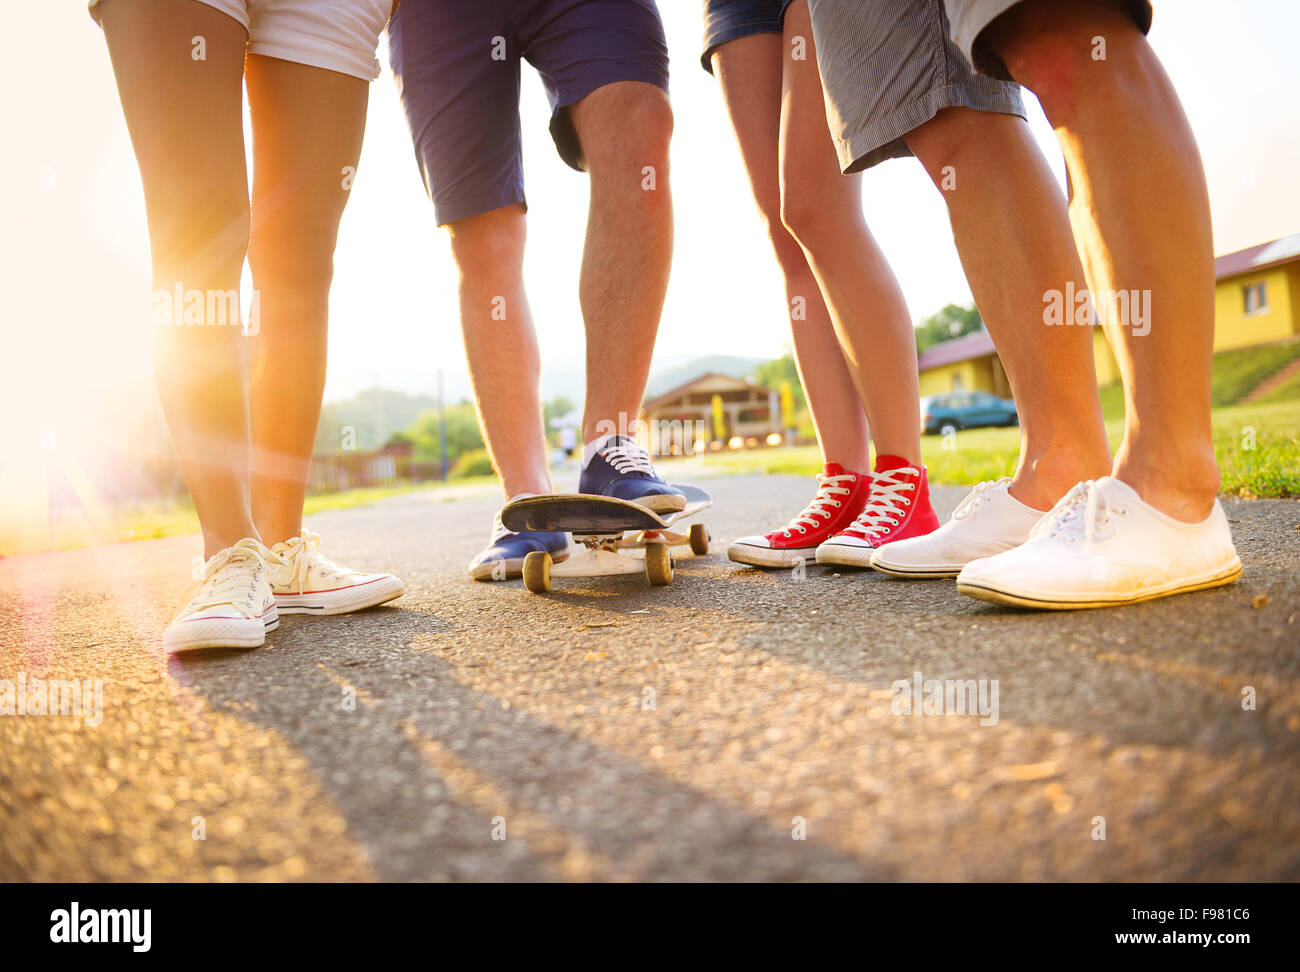 Closeup of legs and sneakers of young people on skateboard Stock Photo